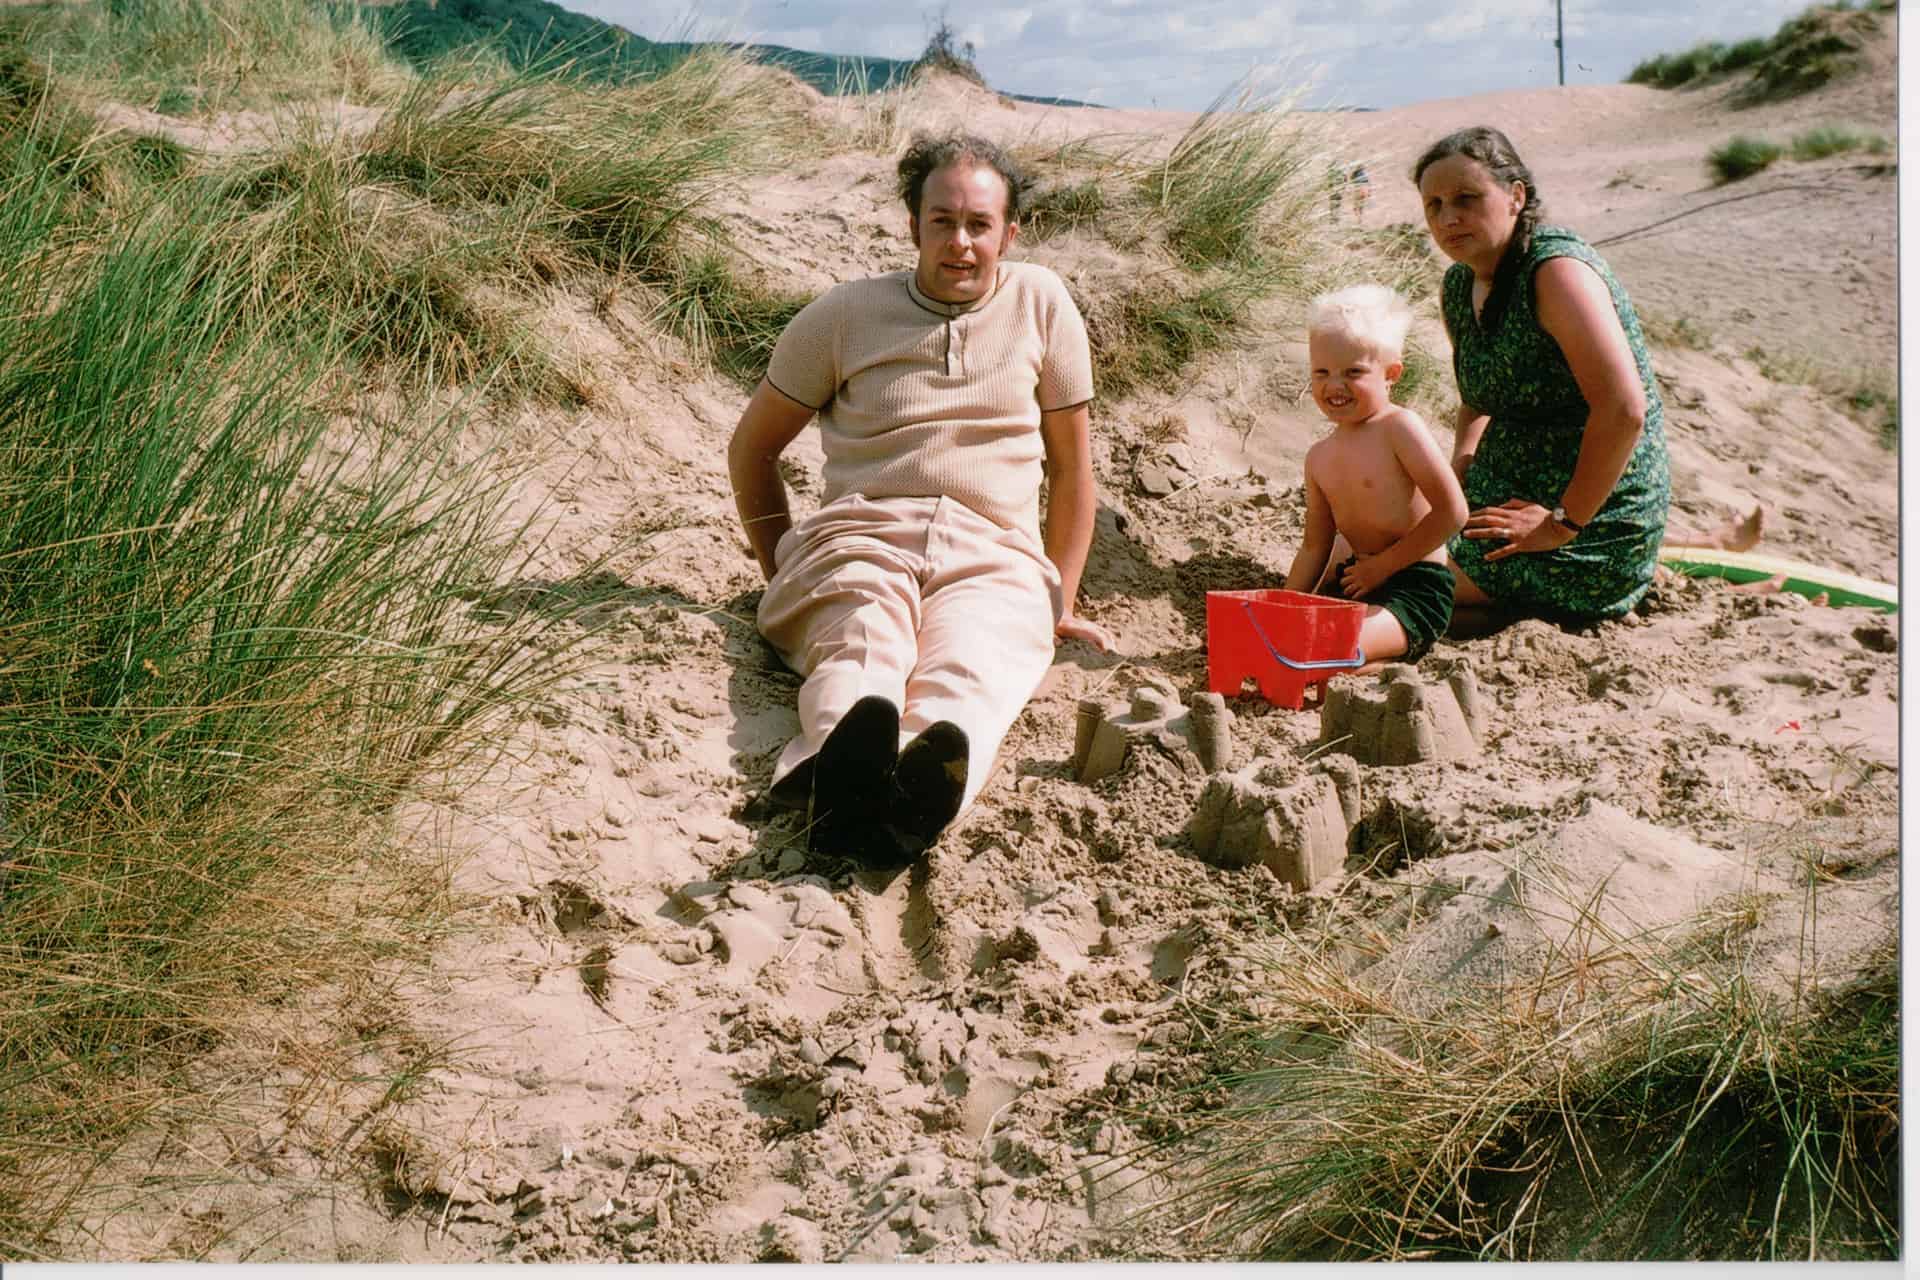 Conrad, Peter and Ruth on holiday, early 1970s.